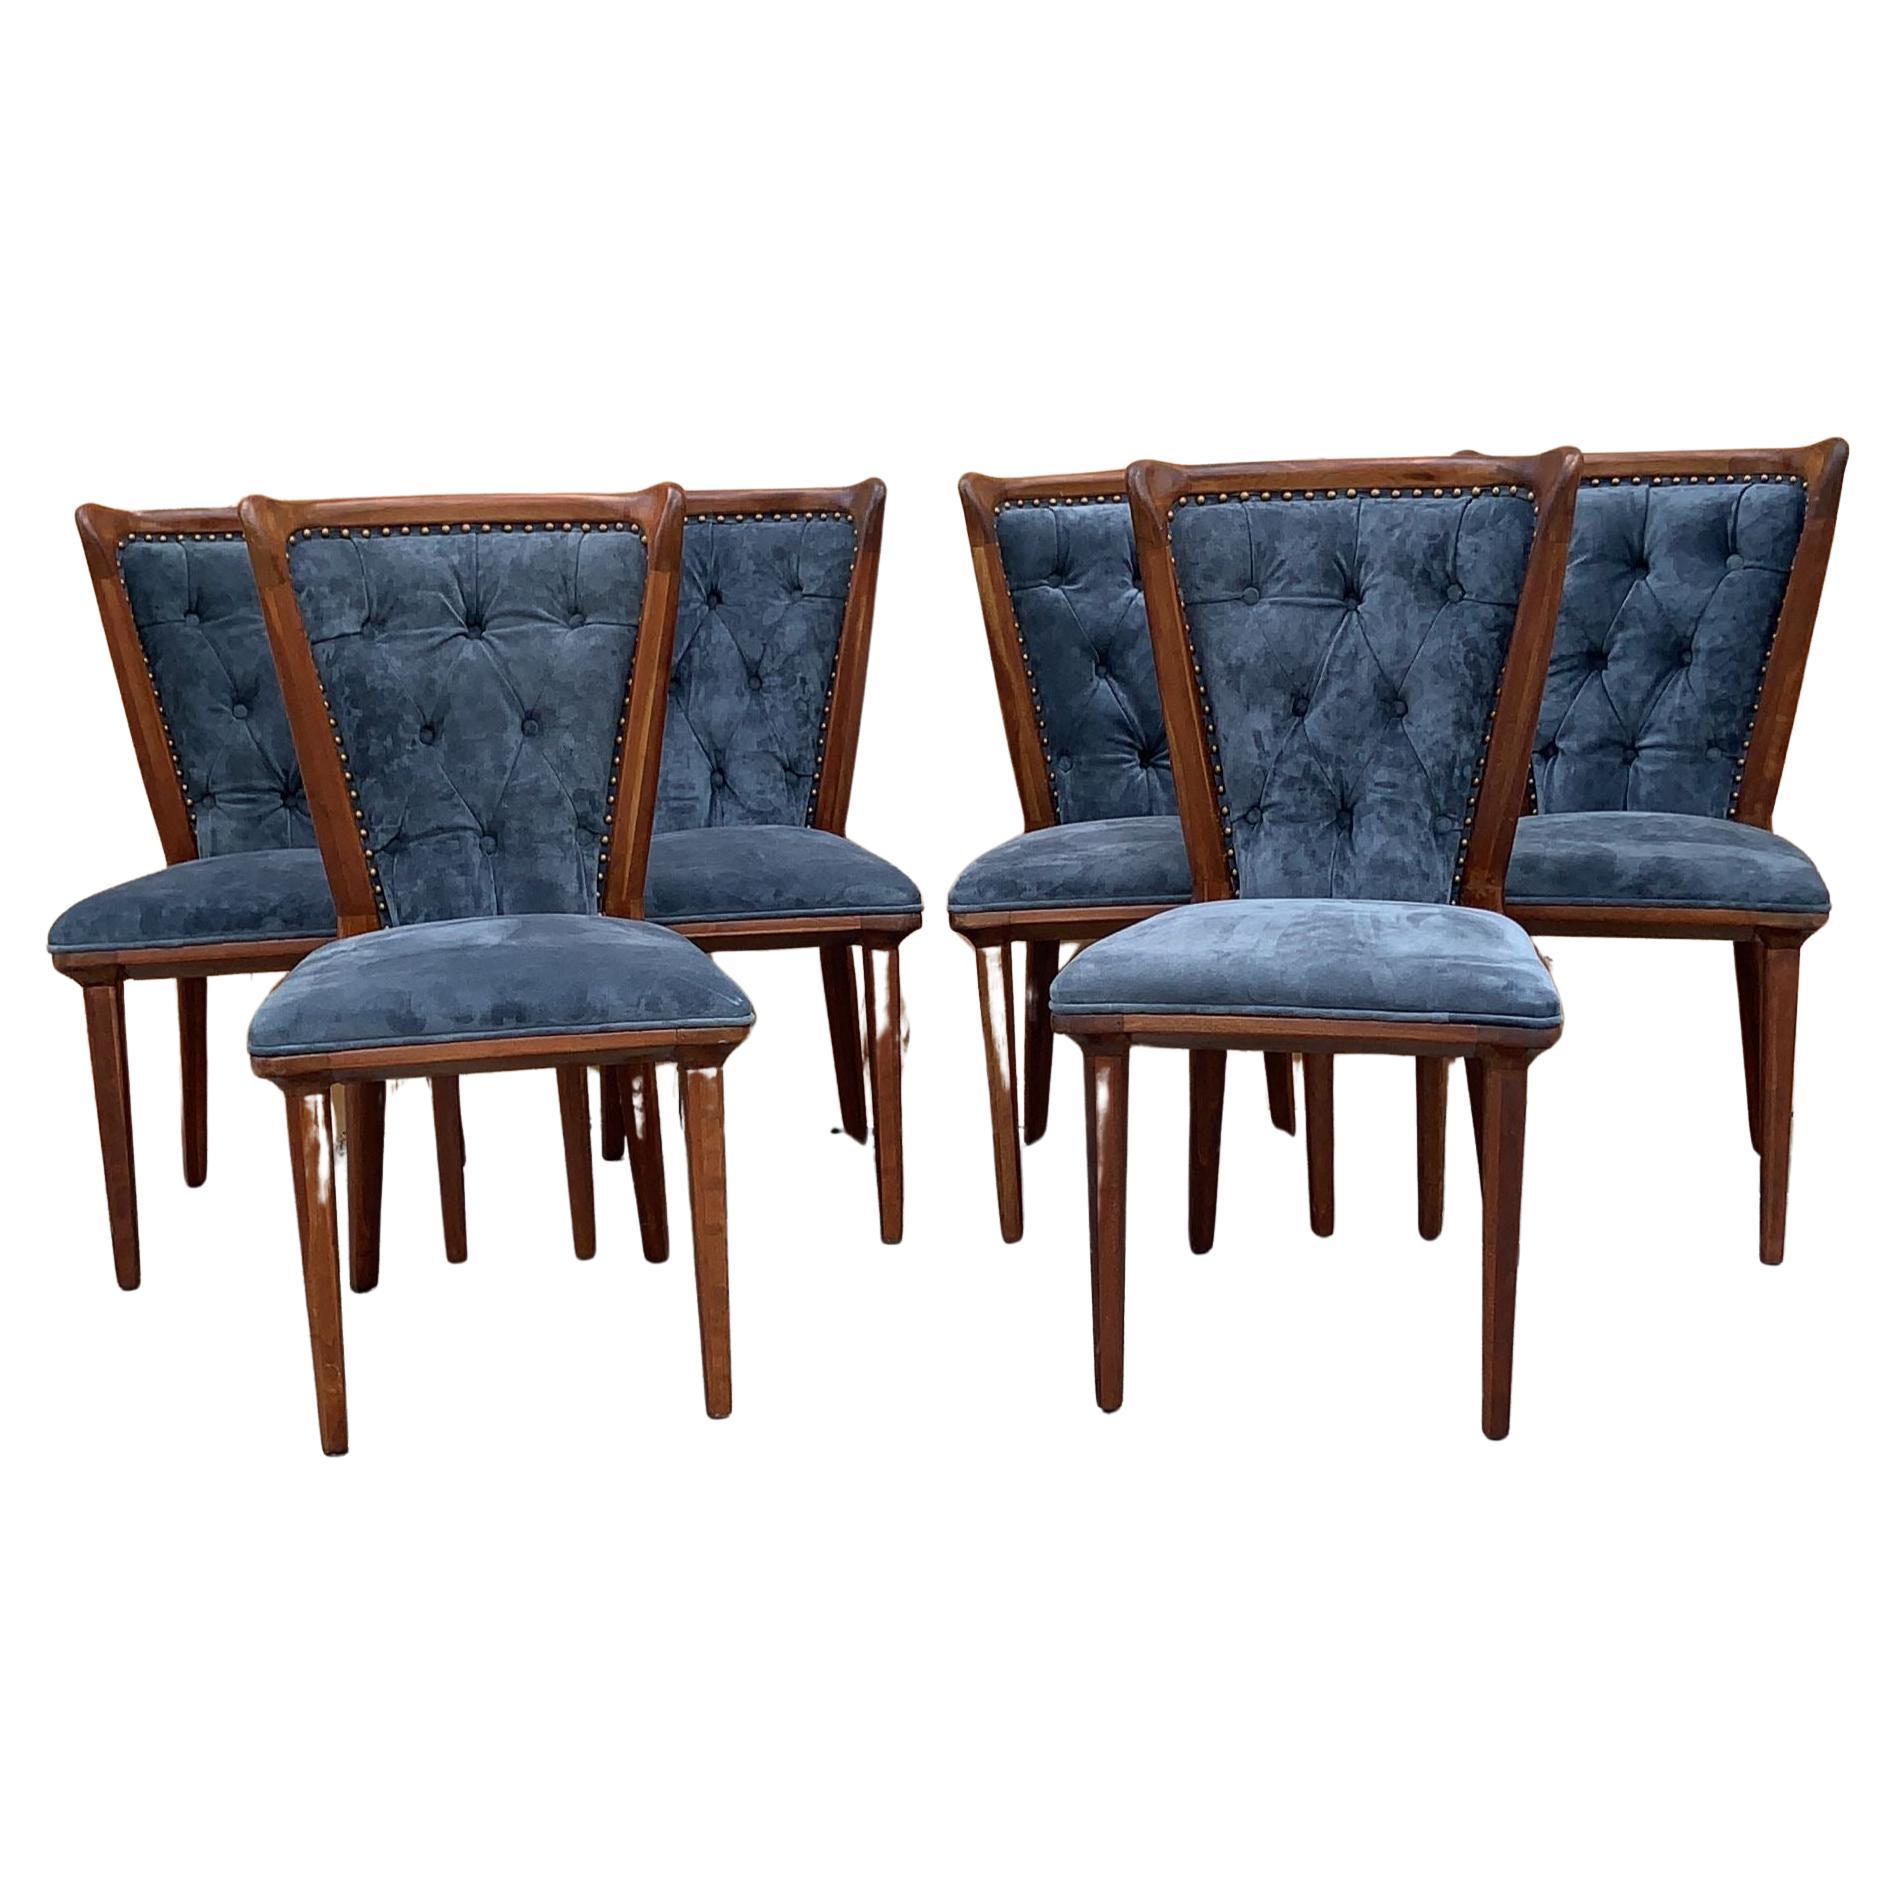 Art Deco Suede Sculptural Curved Back Dining Chairs Newly Upholstered - Set of 6 For Sale